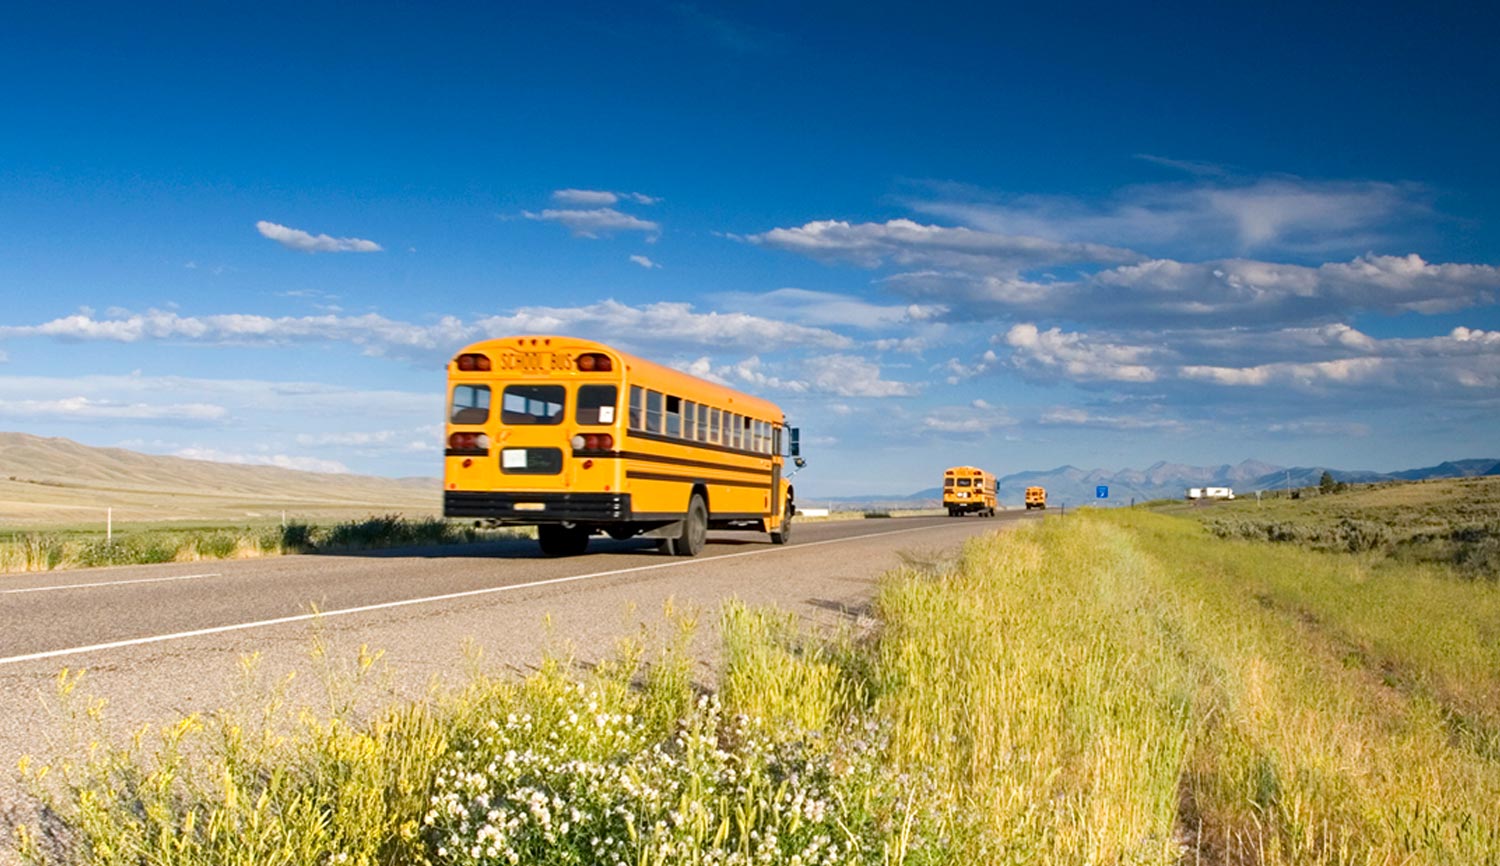 school buses travel on a two way road